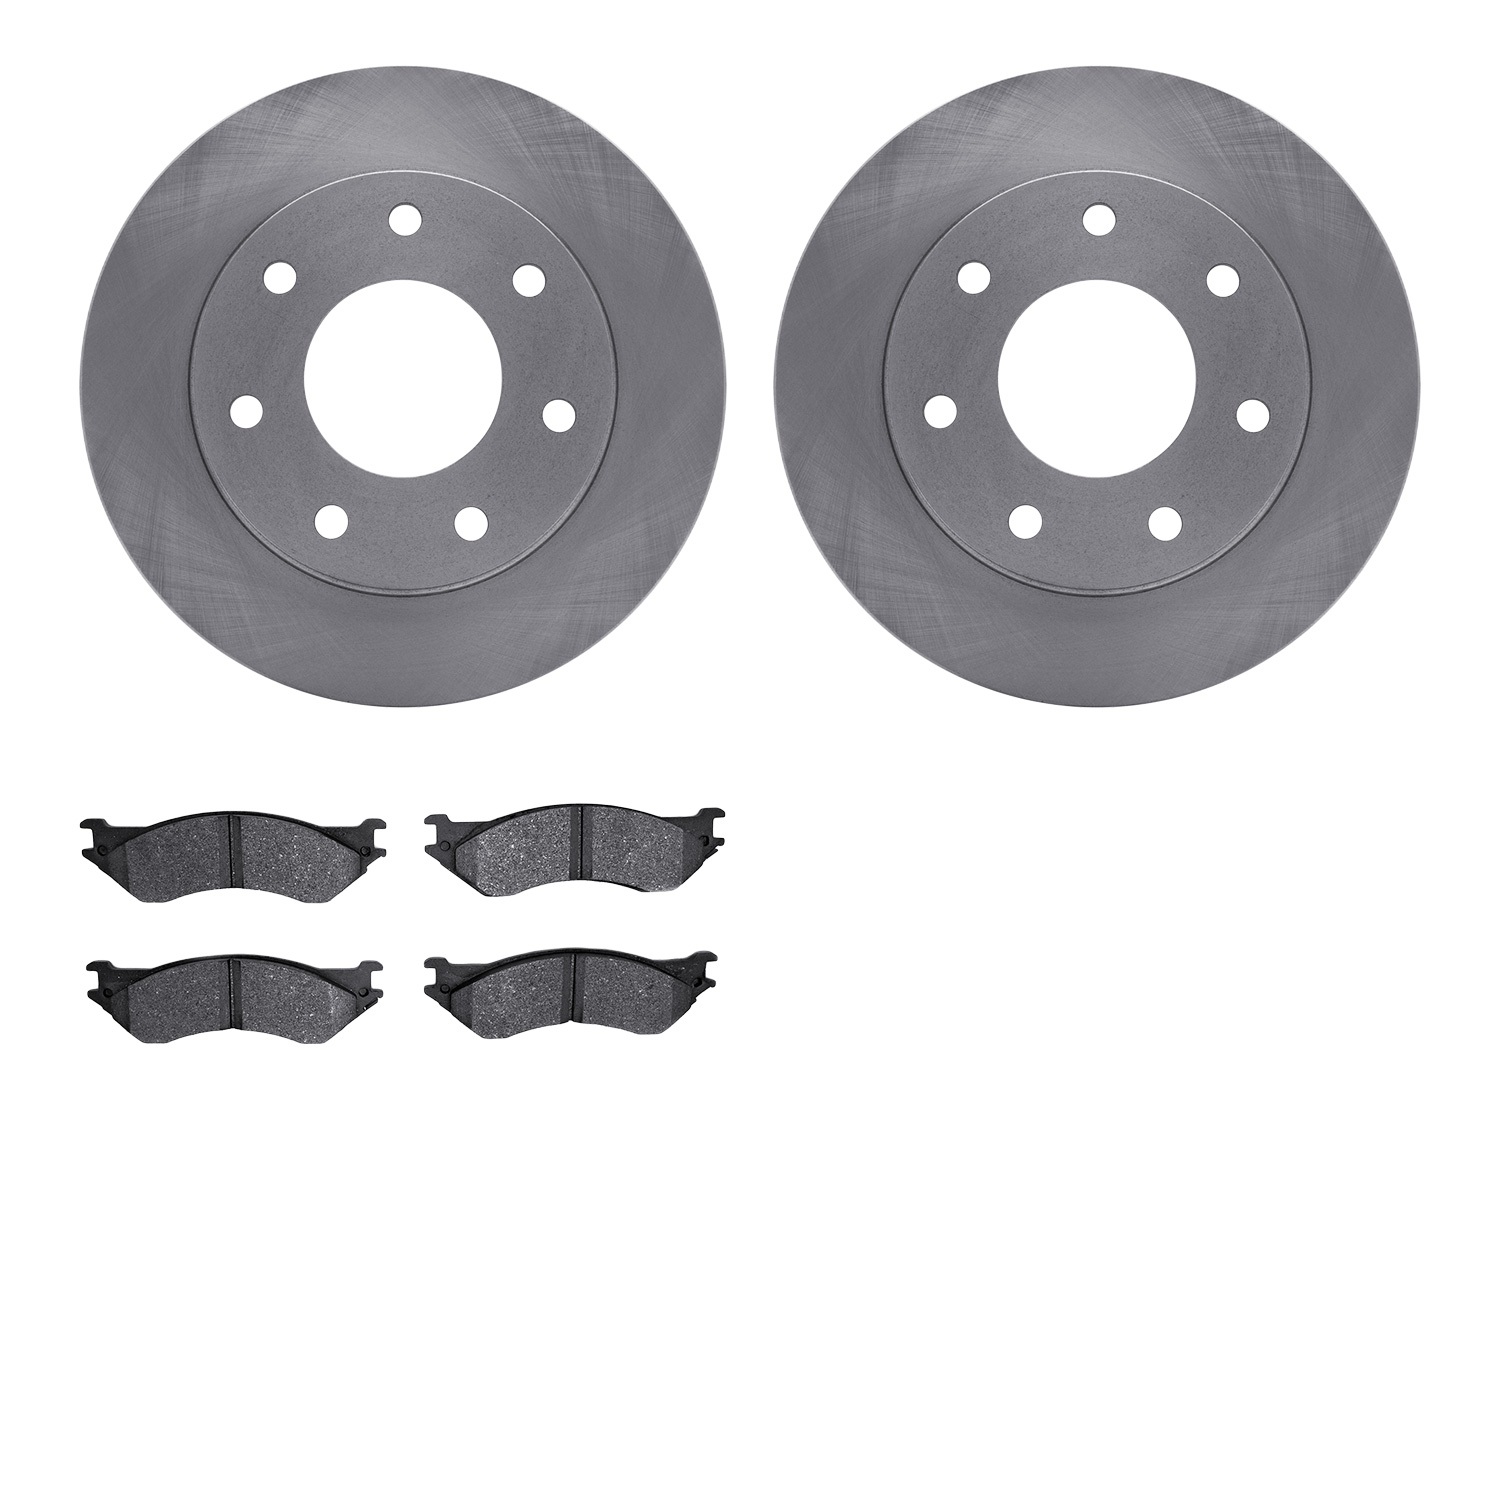 6402-54110 Brake Rotors with Ultimate-Duty Brake Pads, 1997-2004 Ford/Lincoln/Mercury/Mazda, Position: Front